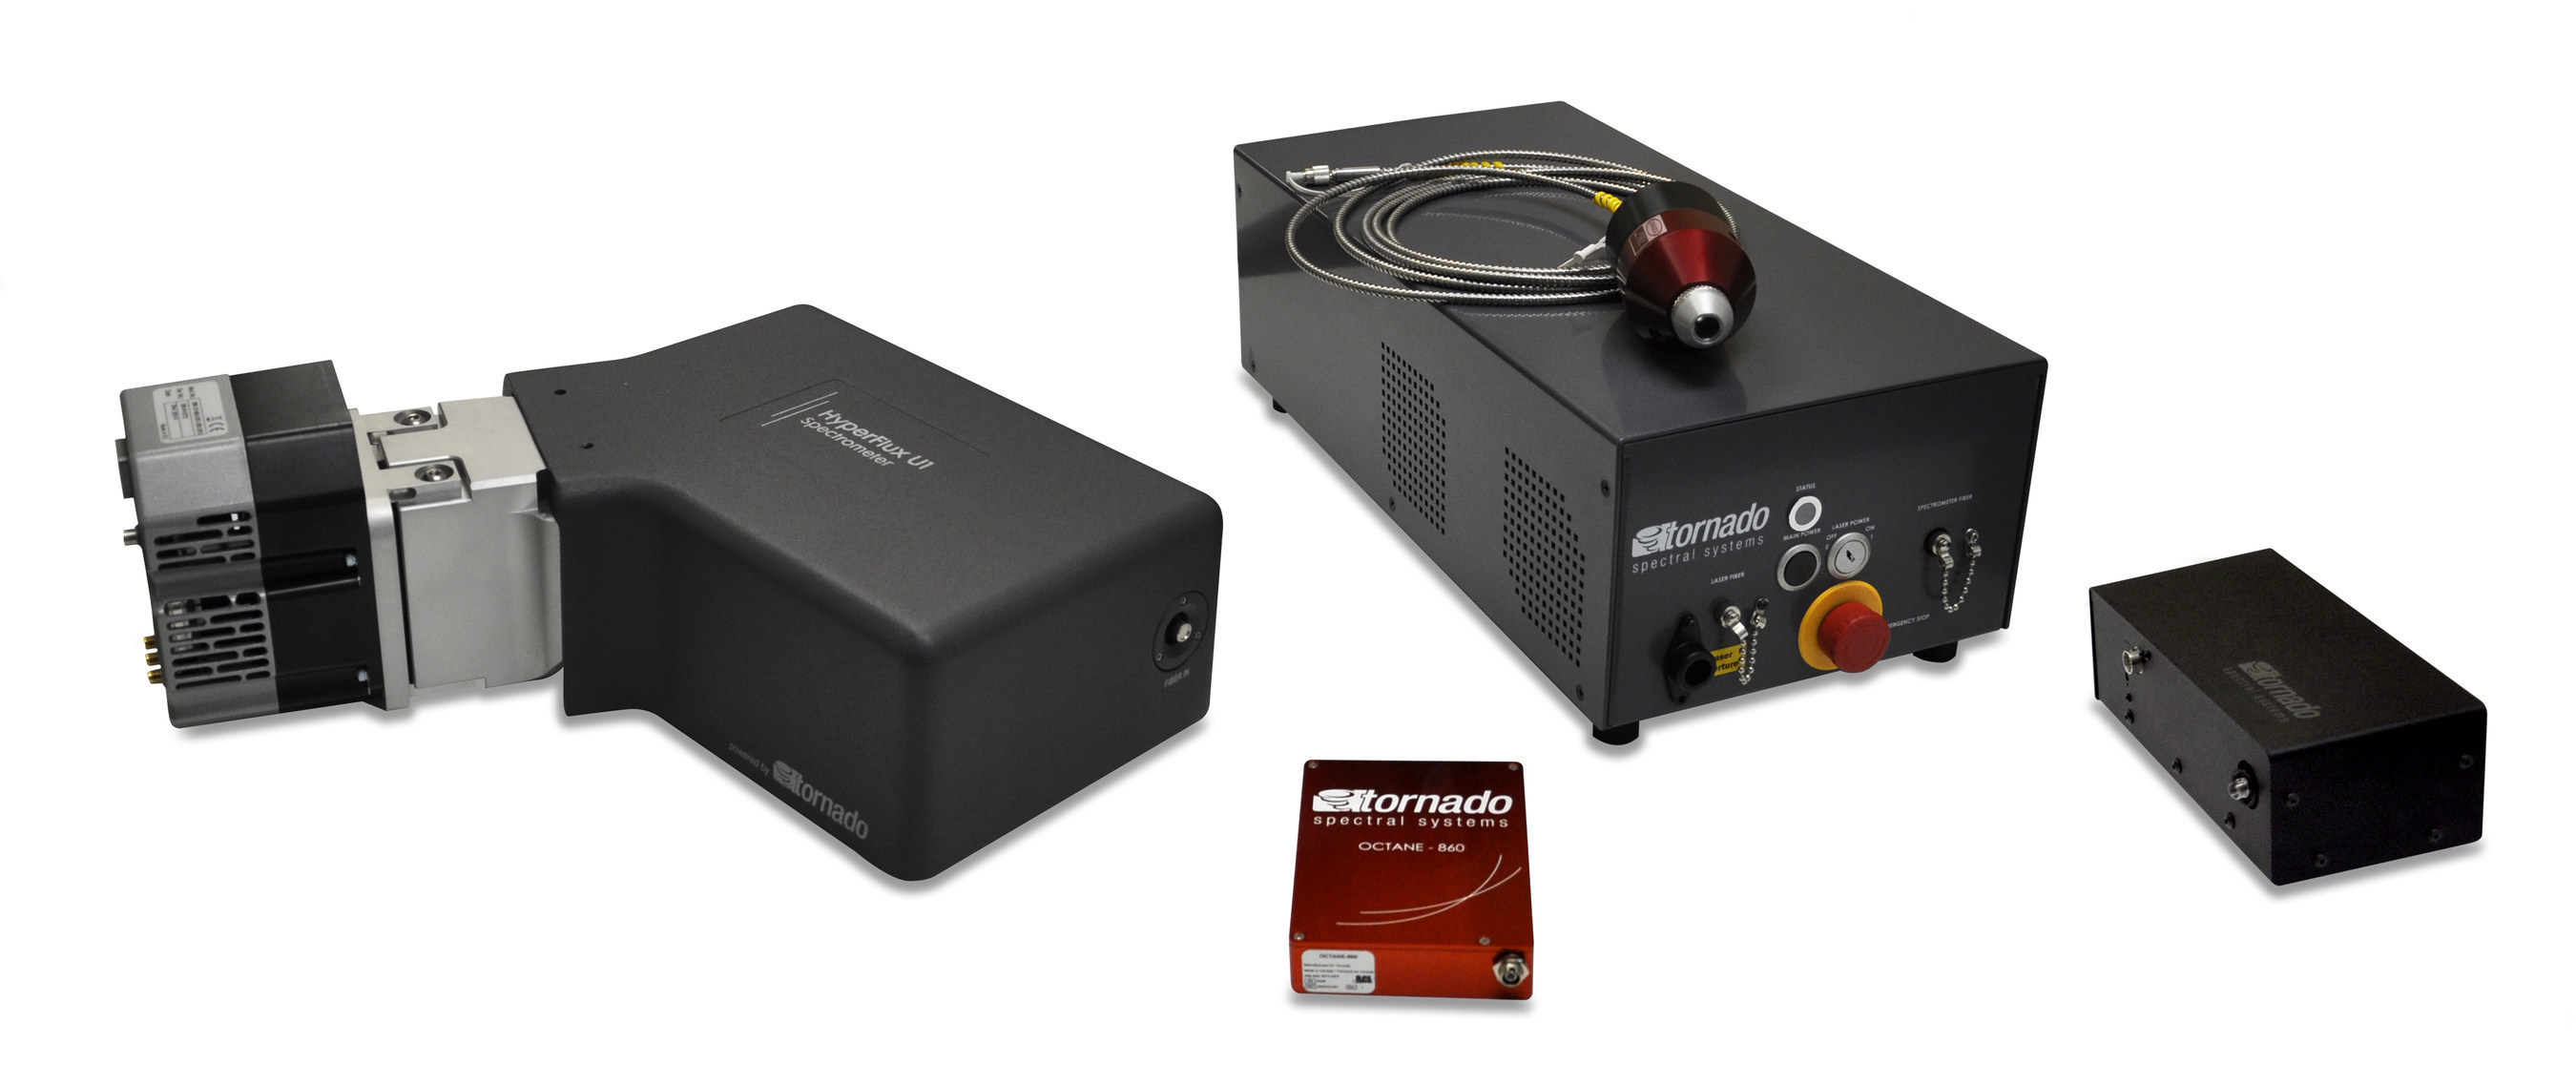 Tornado's compact high-performance spectrometers